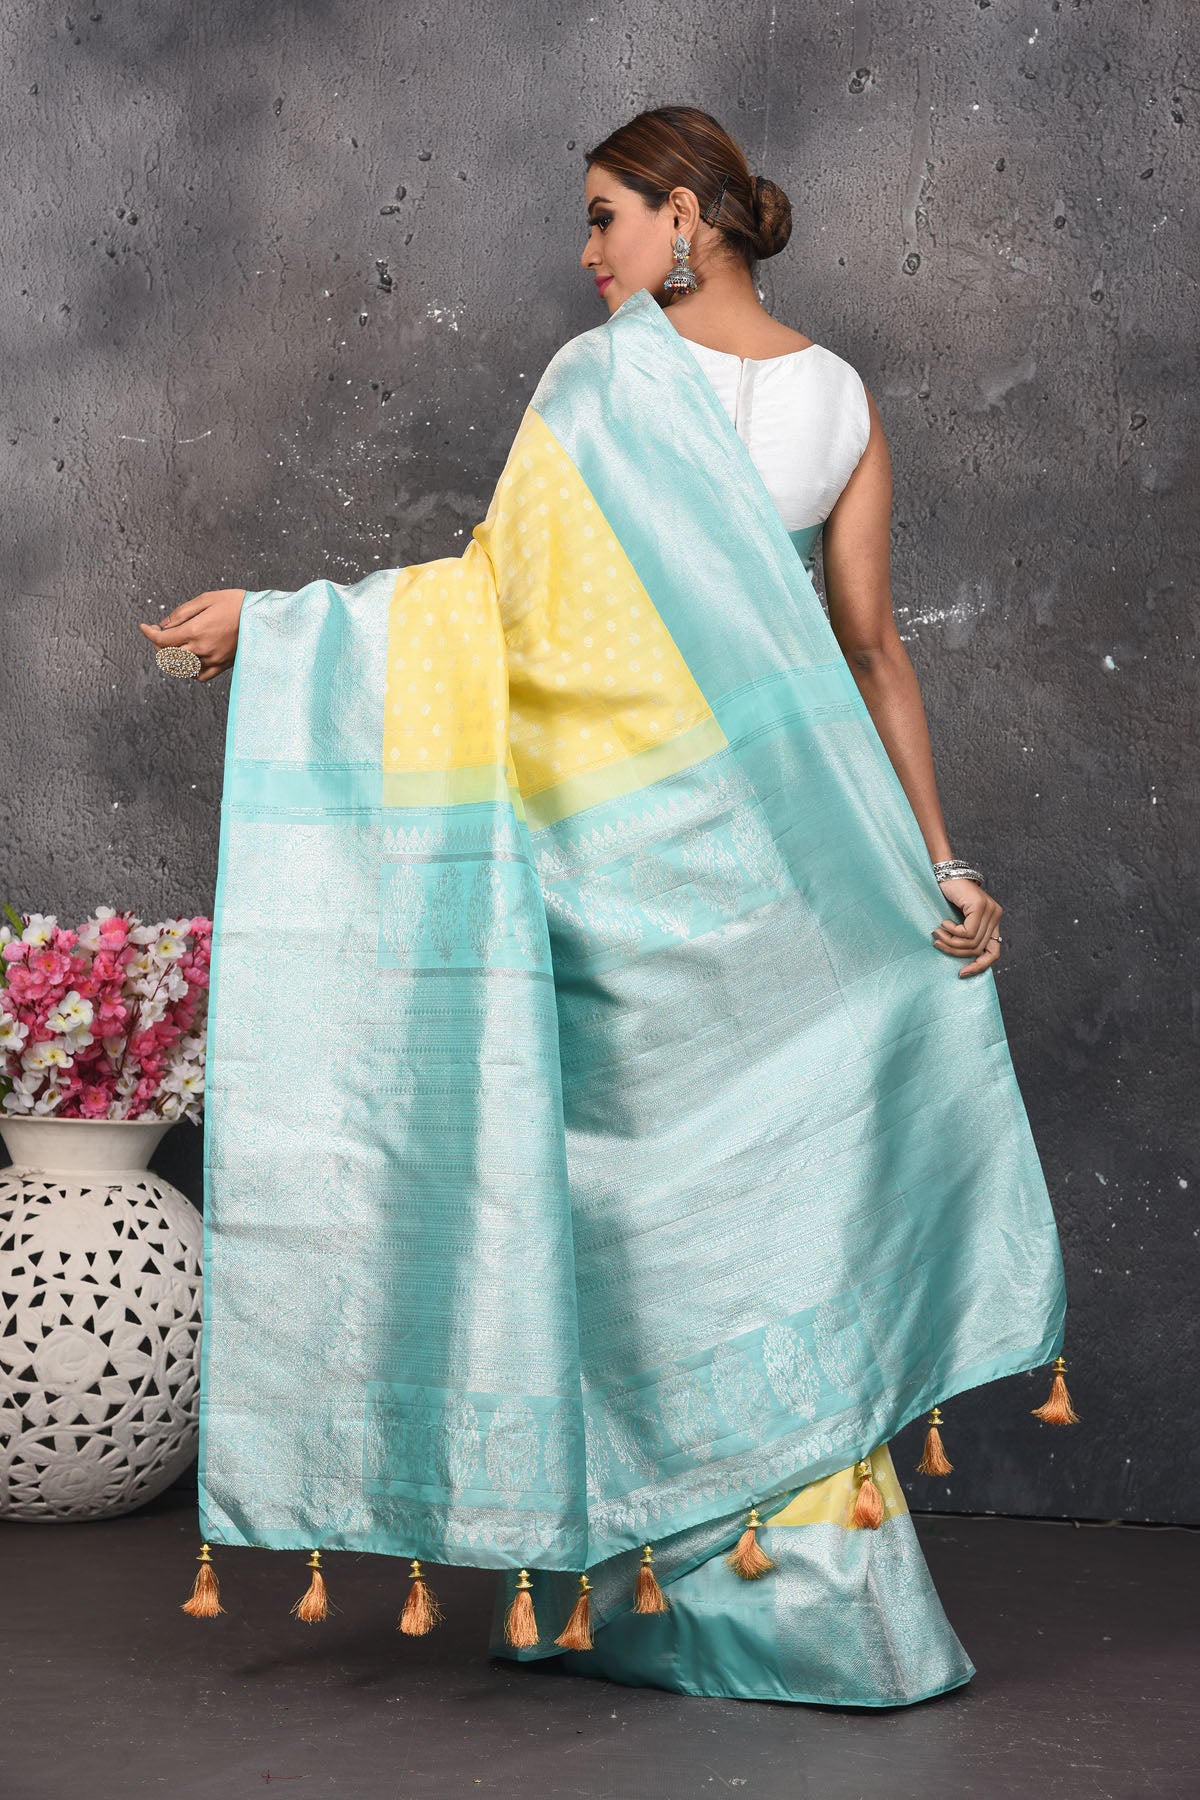 Shop this royal handwoven pure kanchiresham saree in lemon yellow with a firozi blue pallu and buti work online in USA. Presenting Enchanting Yet Breathable Organic Banarasi Saree Made from Kanjivaram silk. Drape yourself in this beautiful banarasi saree from Pure Elegance Indian Fashion Store in USA with Zari woven Border with a potli bag and high heels for a flawless look.- Back view with open pallu.